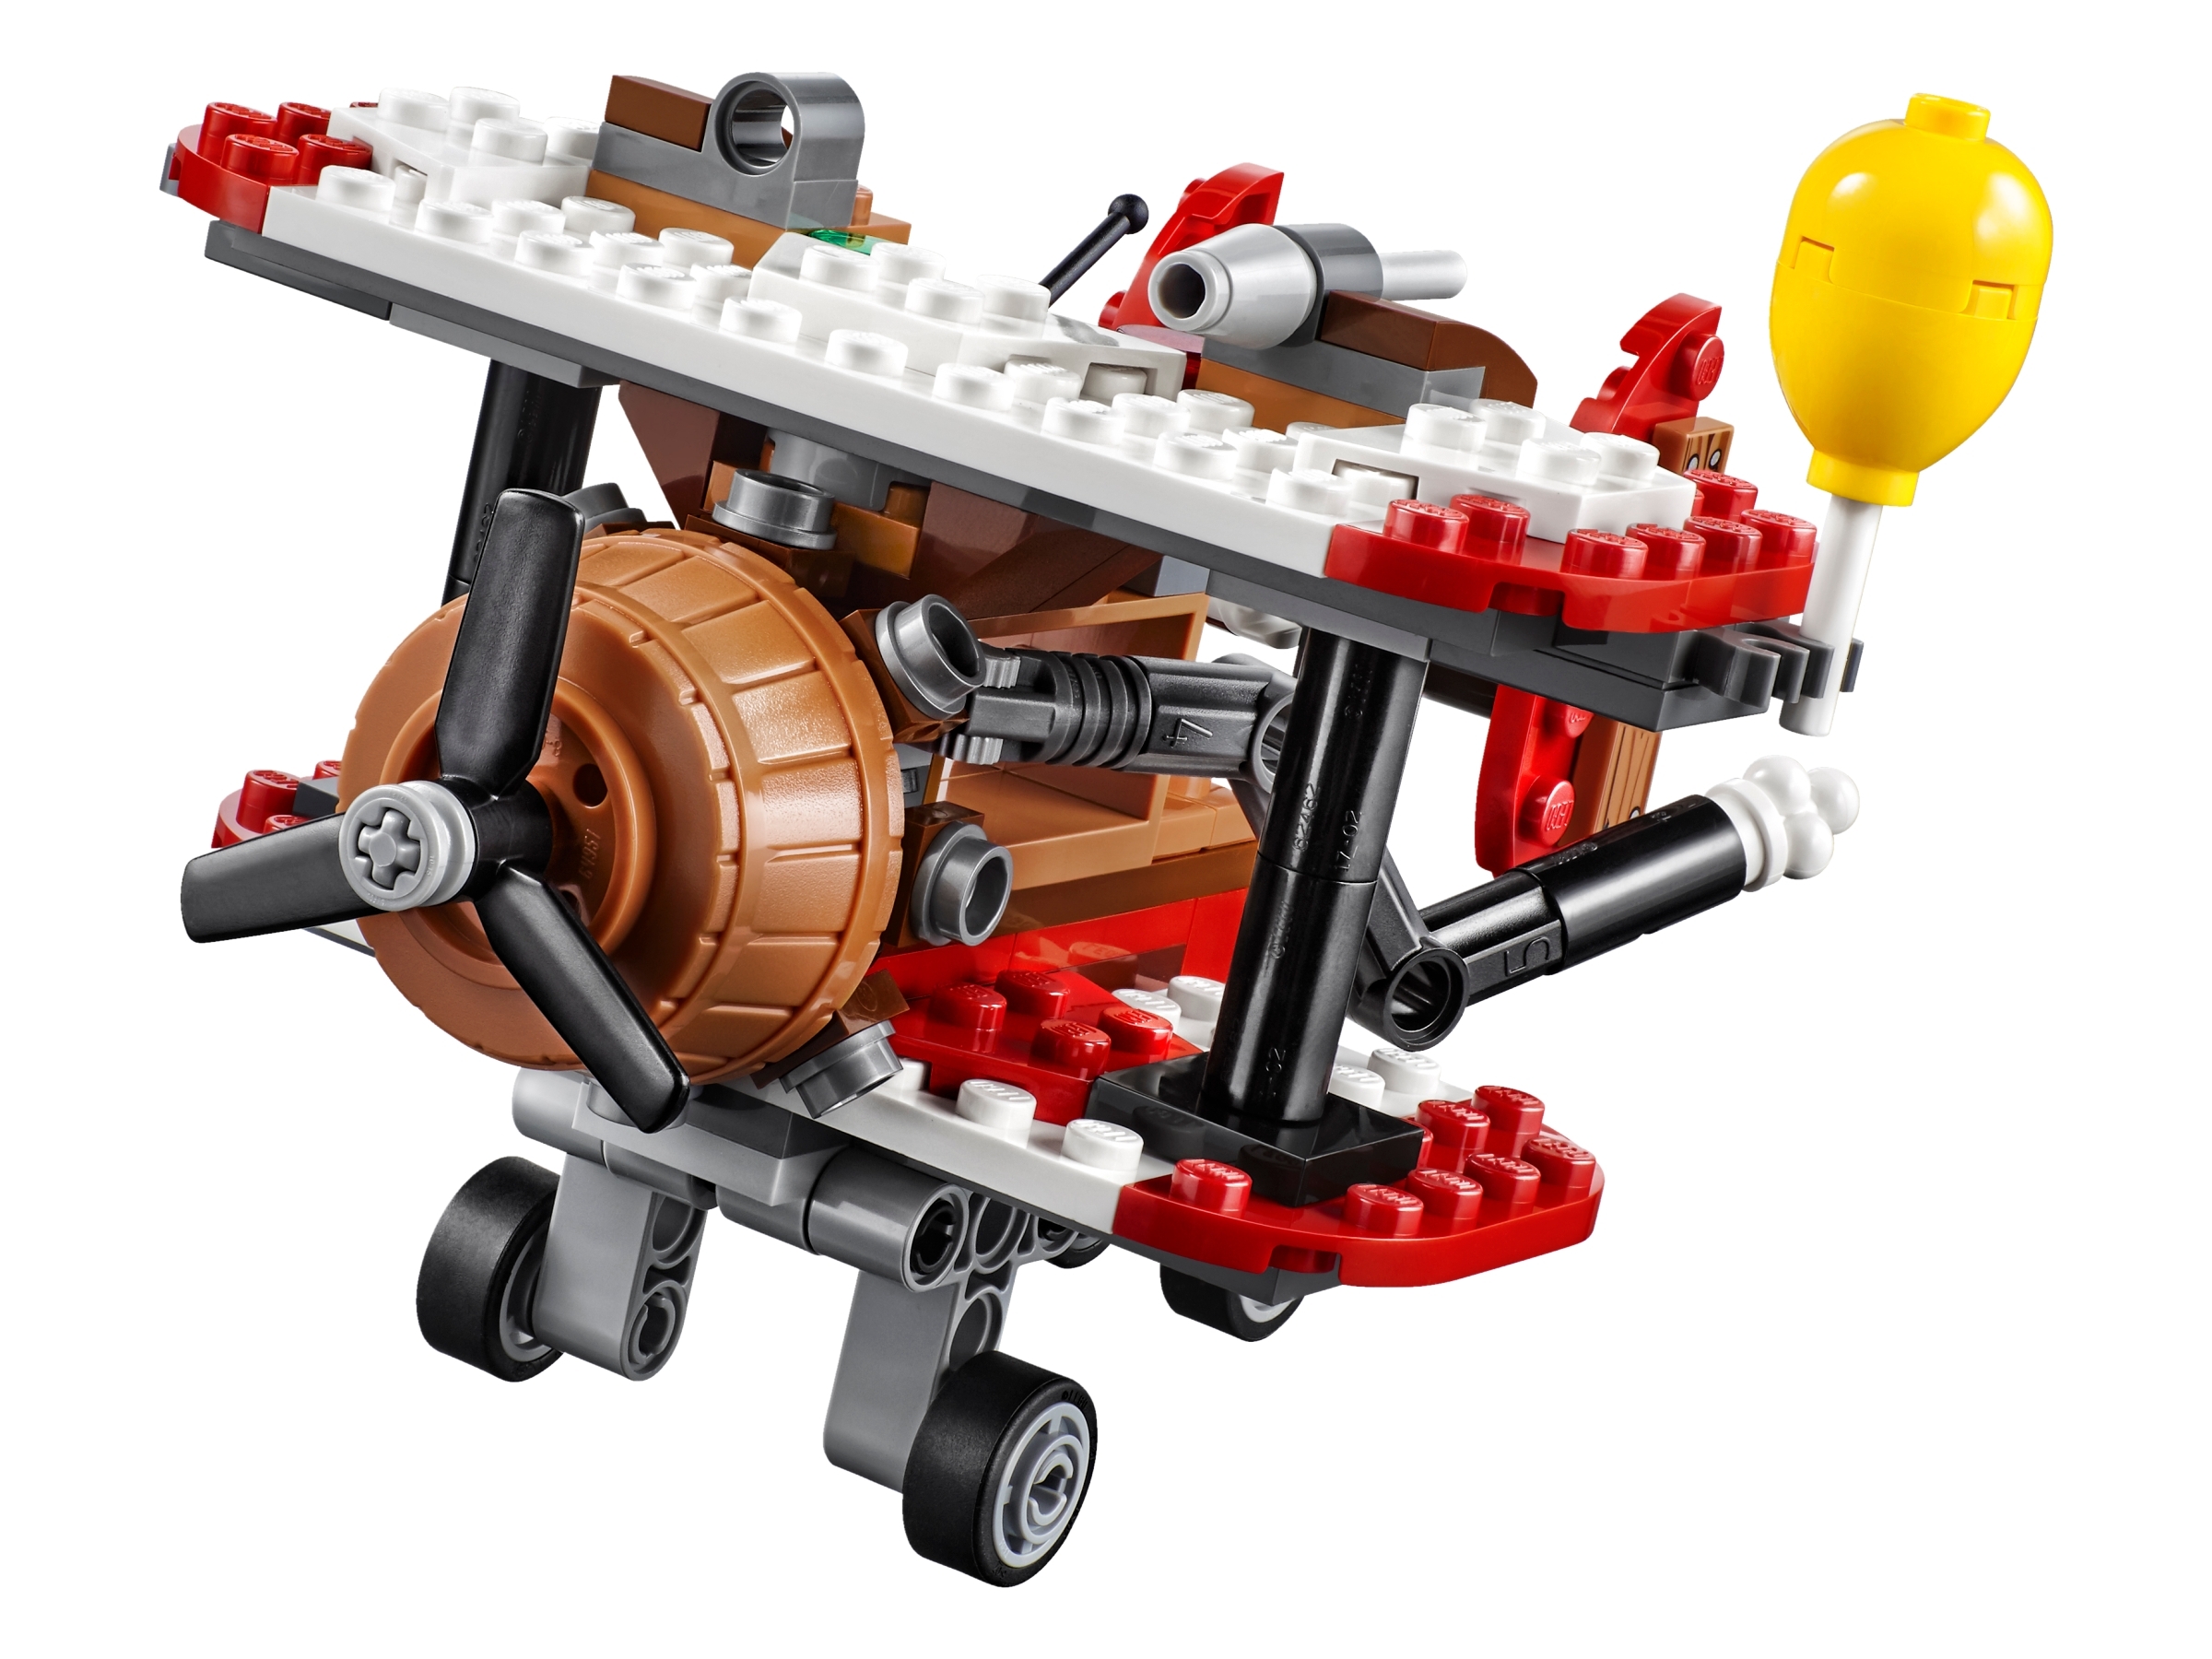 NEW LEGO Pilot Pig FROM SET 75822 THE ANGRY BIRDS MOVIE ang004 